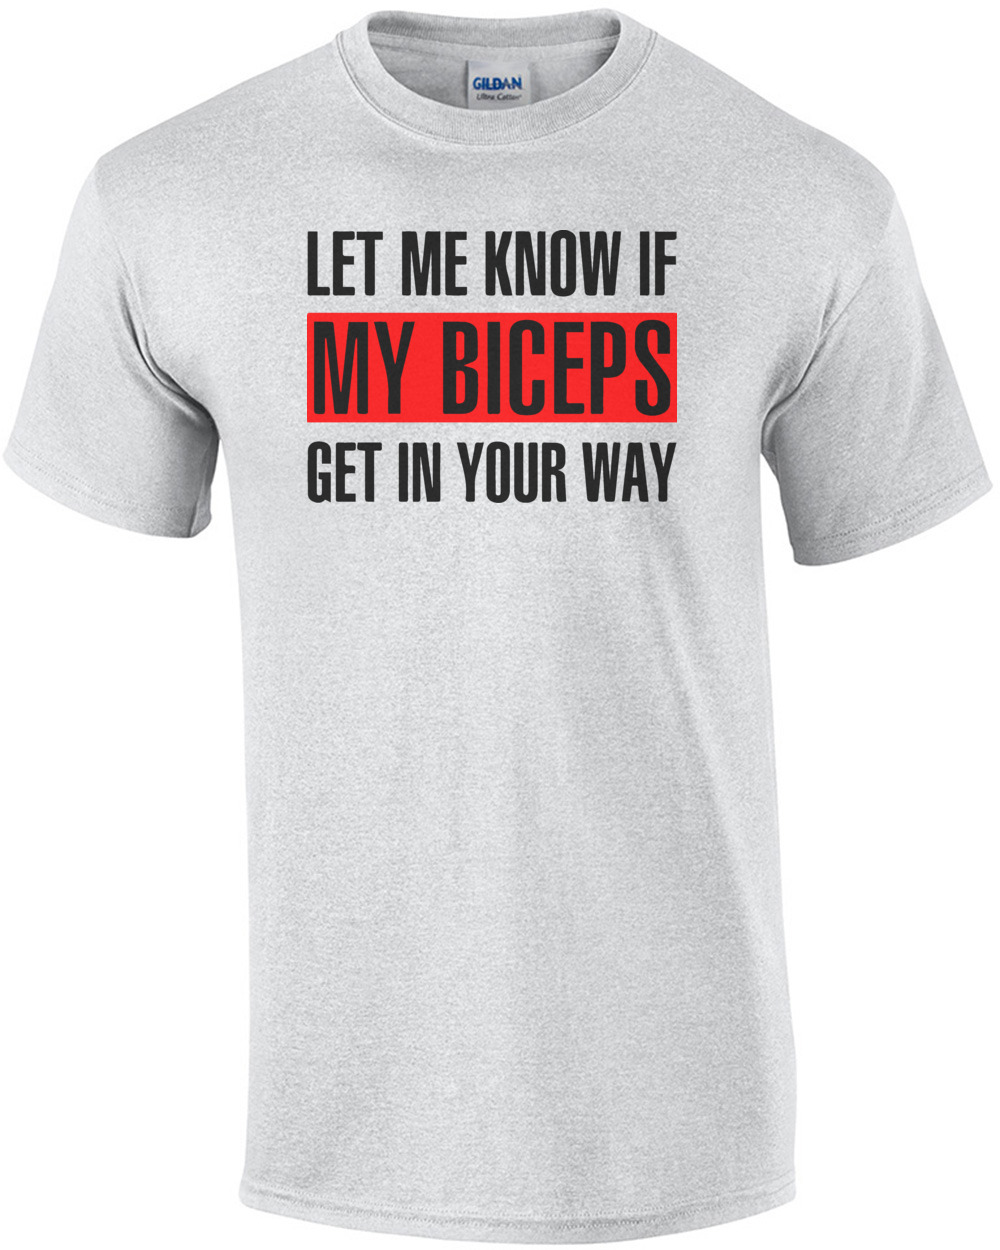 Let Me Know If My Biceps Get in Your Way Shirt, Training Shirt